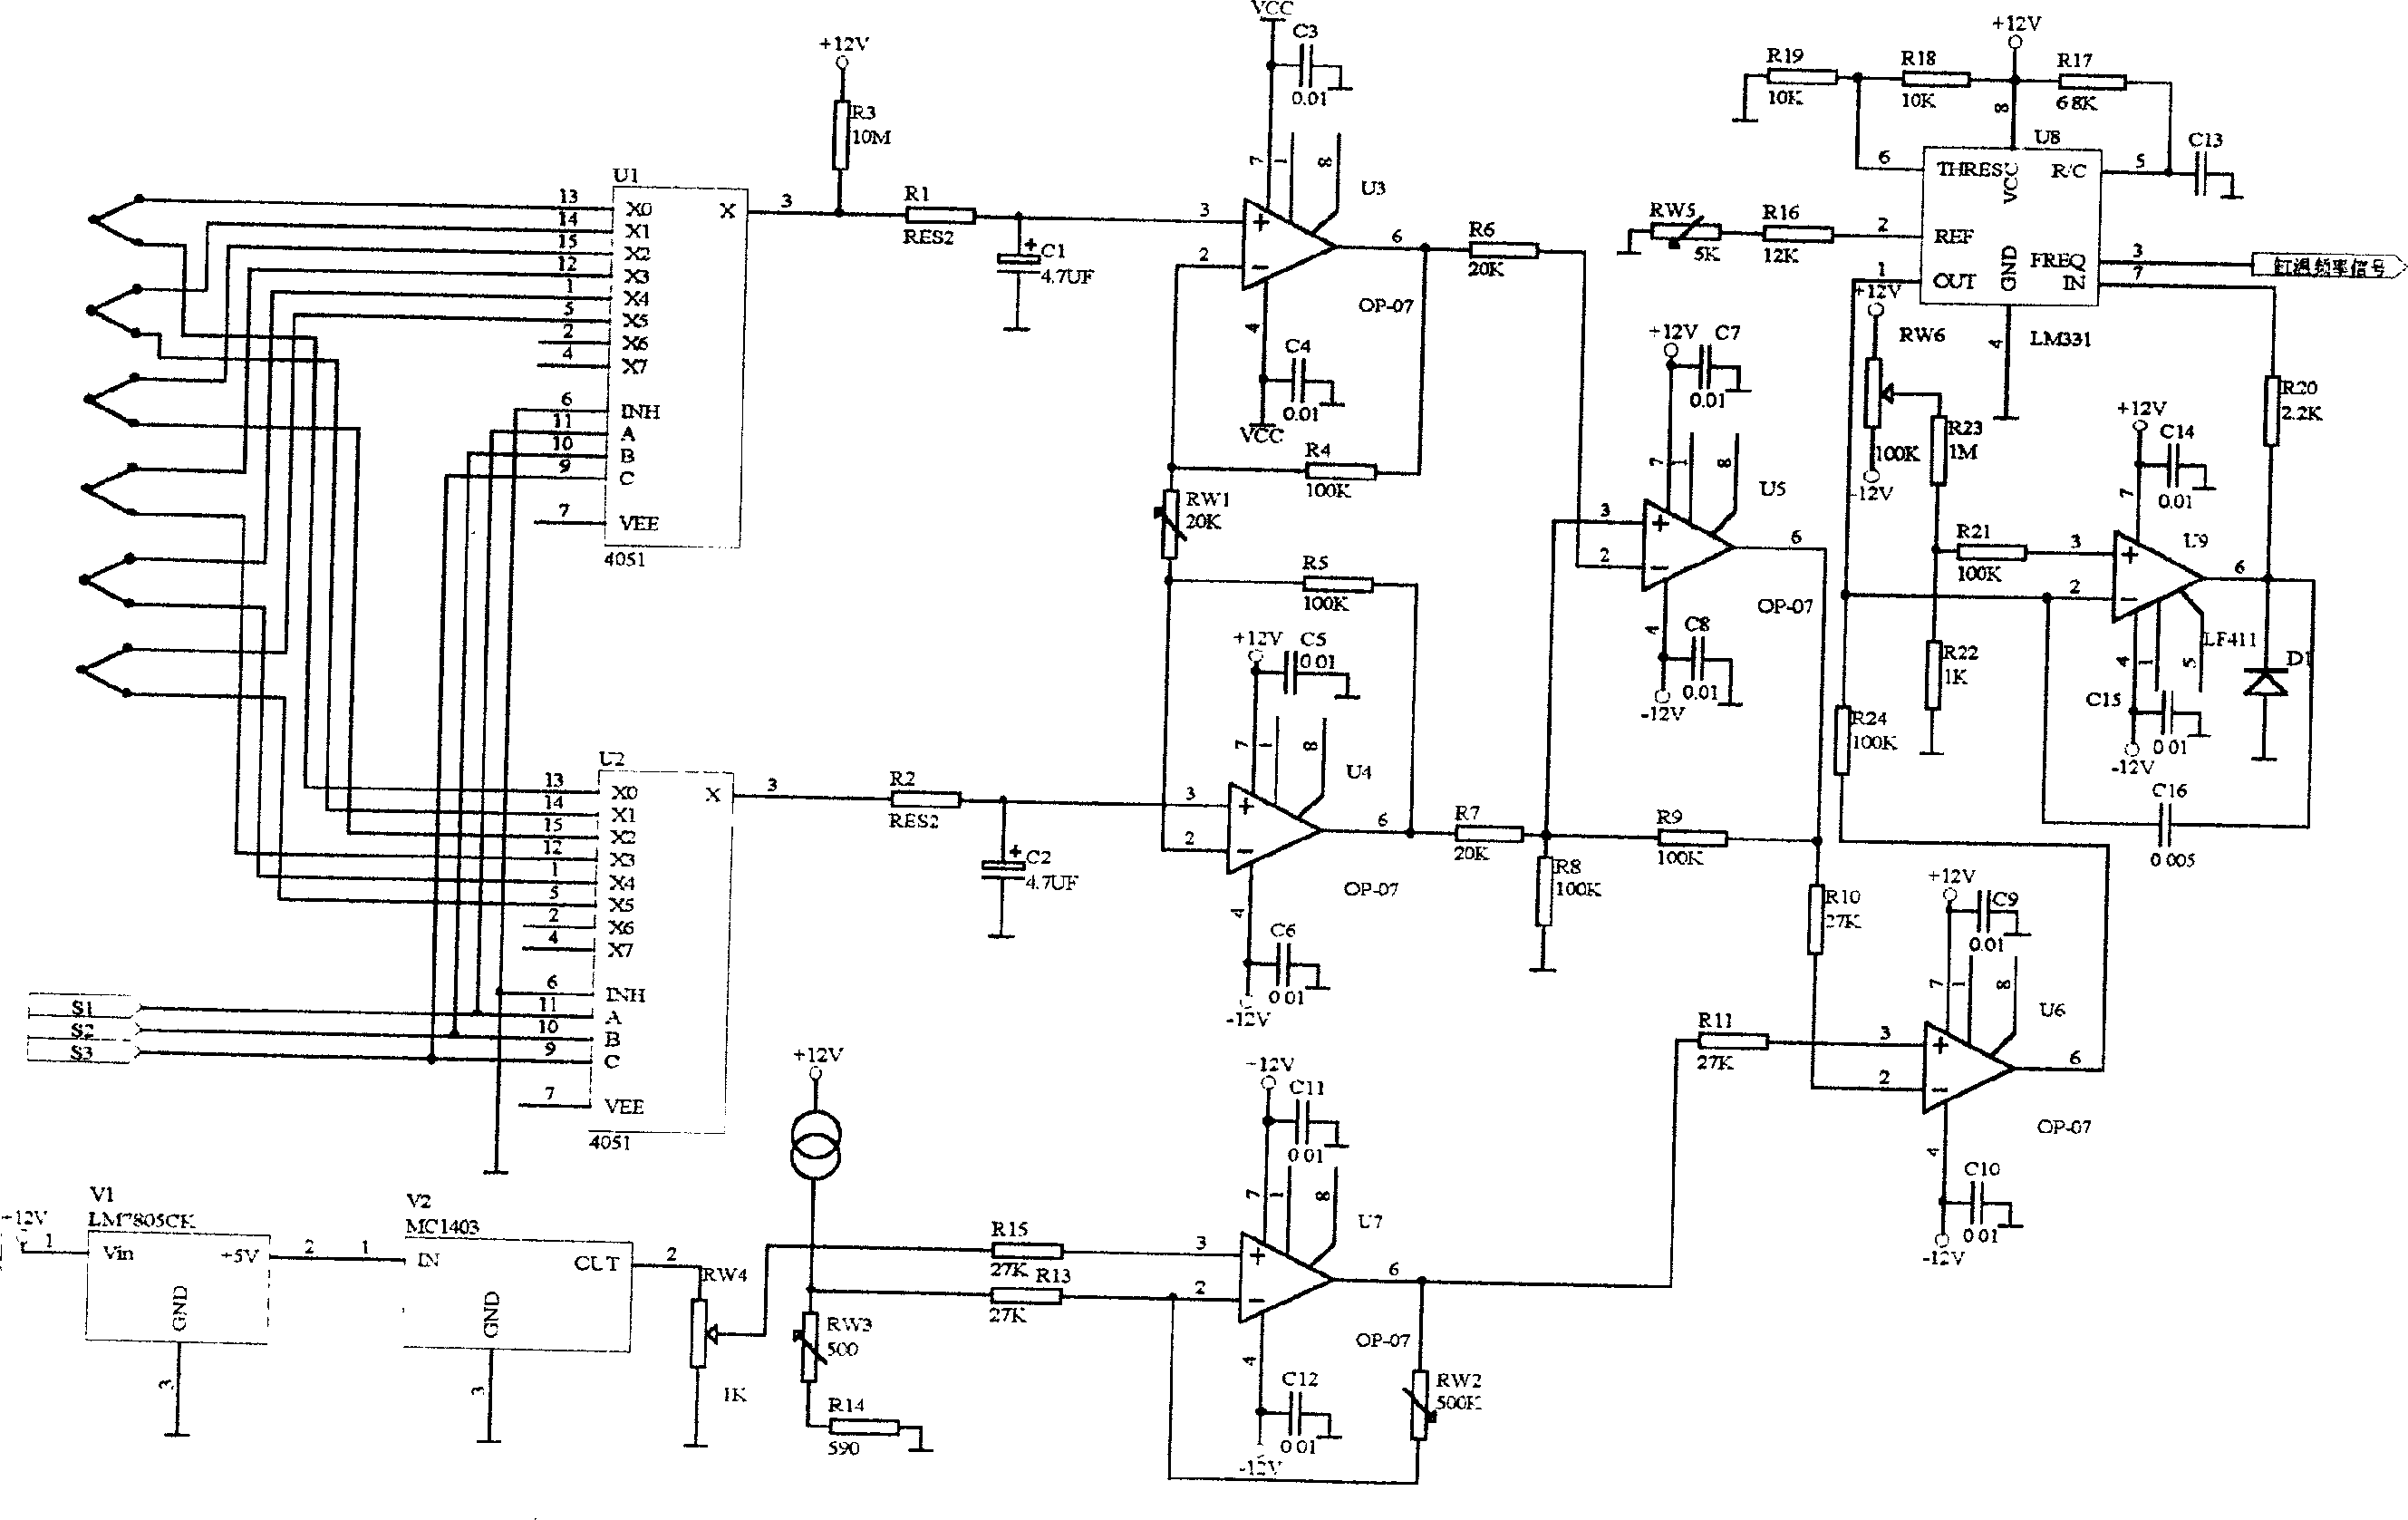 Electrically controlled fuel gas mixer